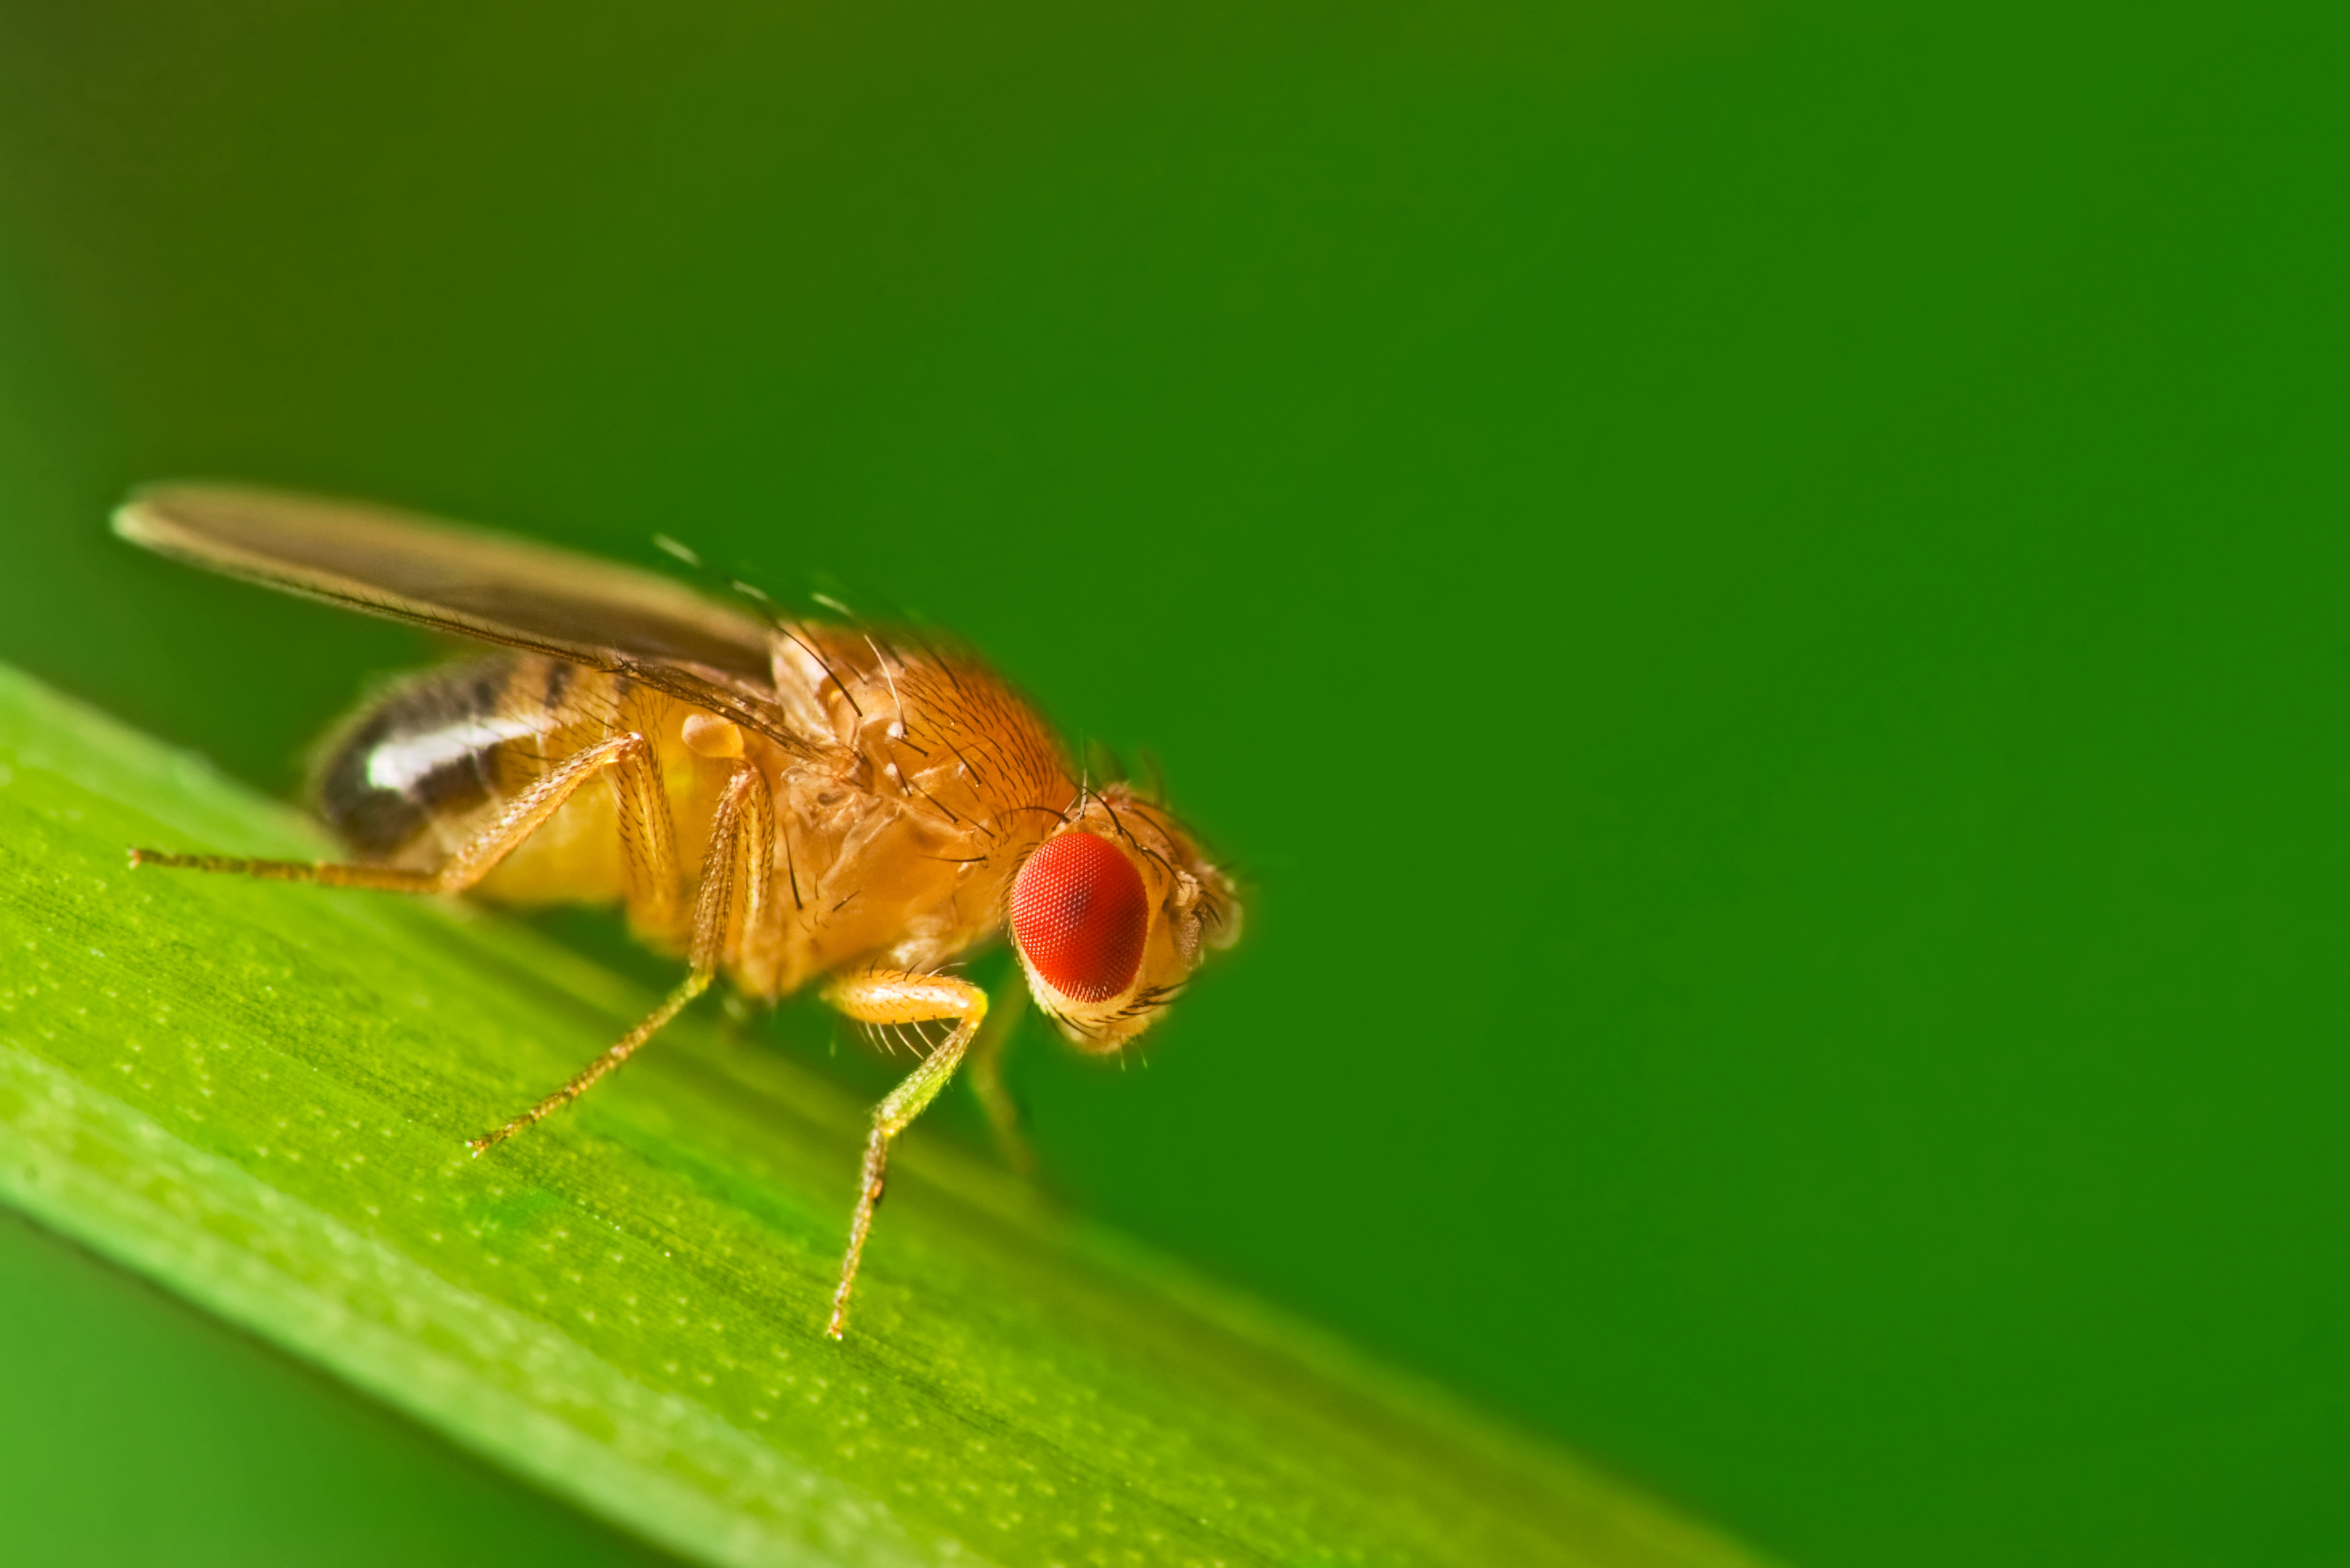 Image of a fruit fly from ichemblog.org.